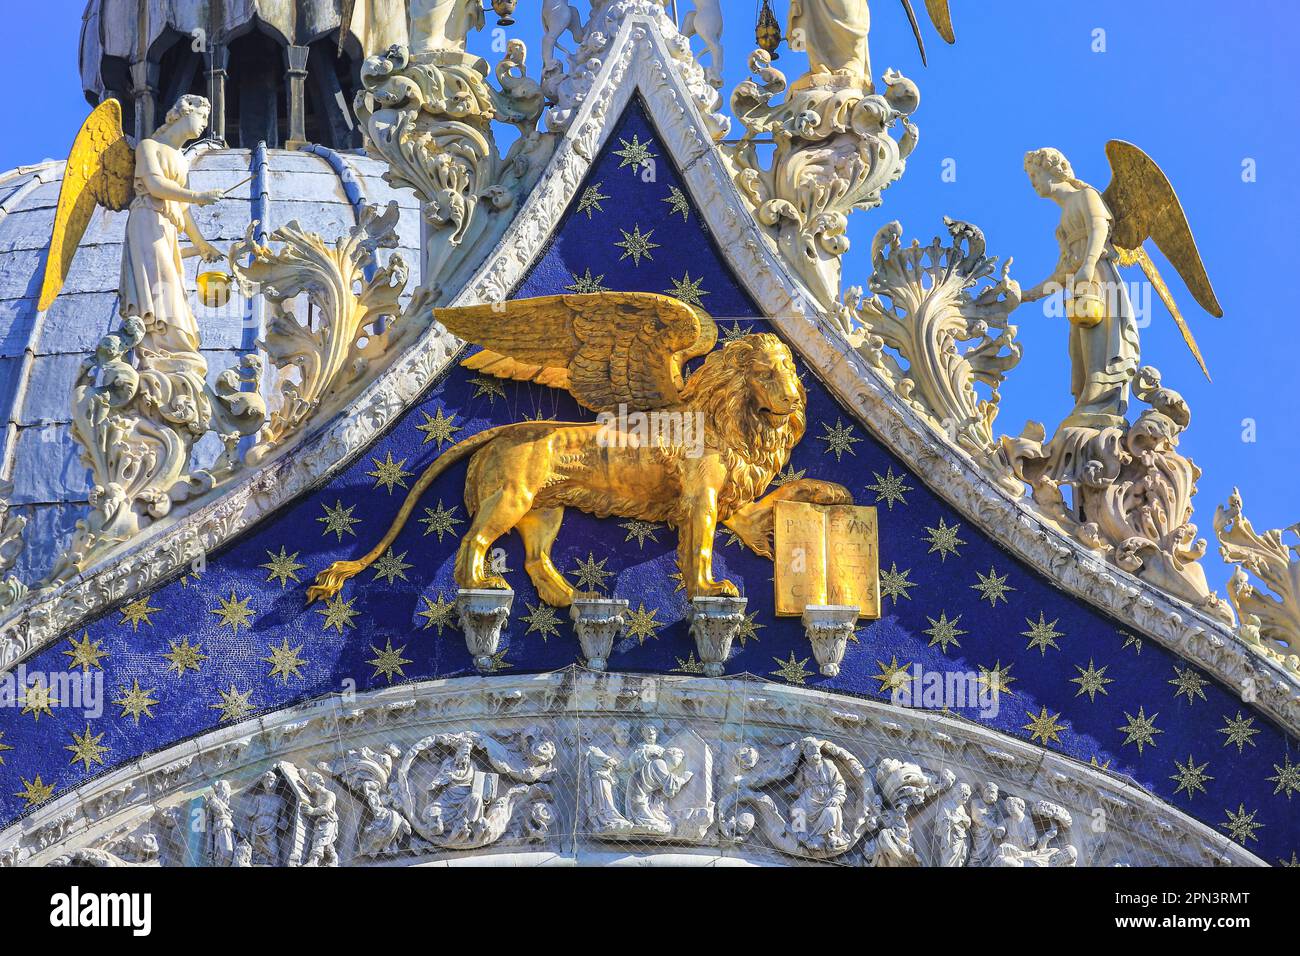 St Mark's Basilica Venice, detail of golden lion, mosaics and angel statues on the roof, church attached to the Doge's Palace, Venezia, Italy, Europe Stock Photo